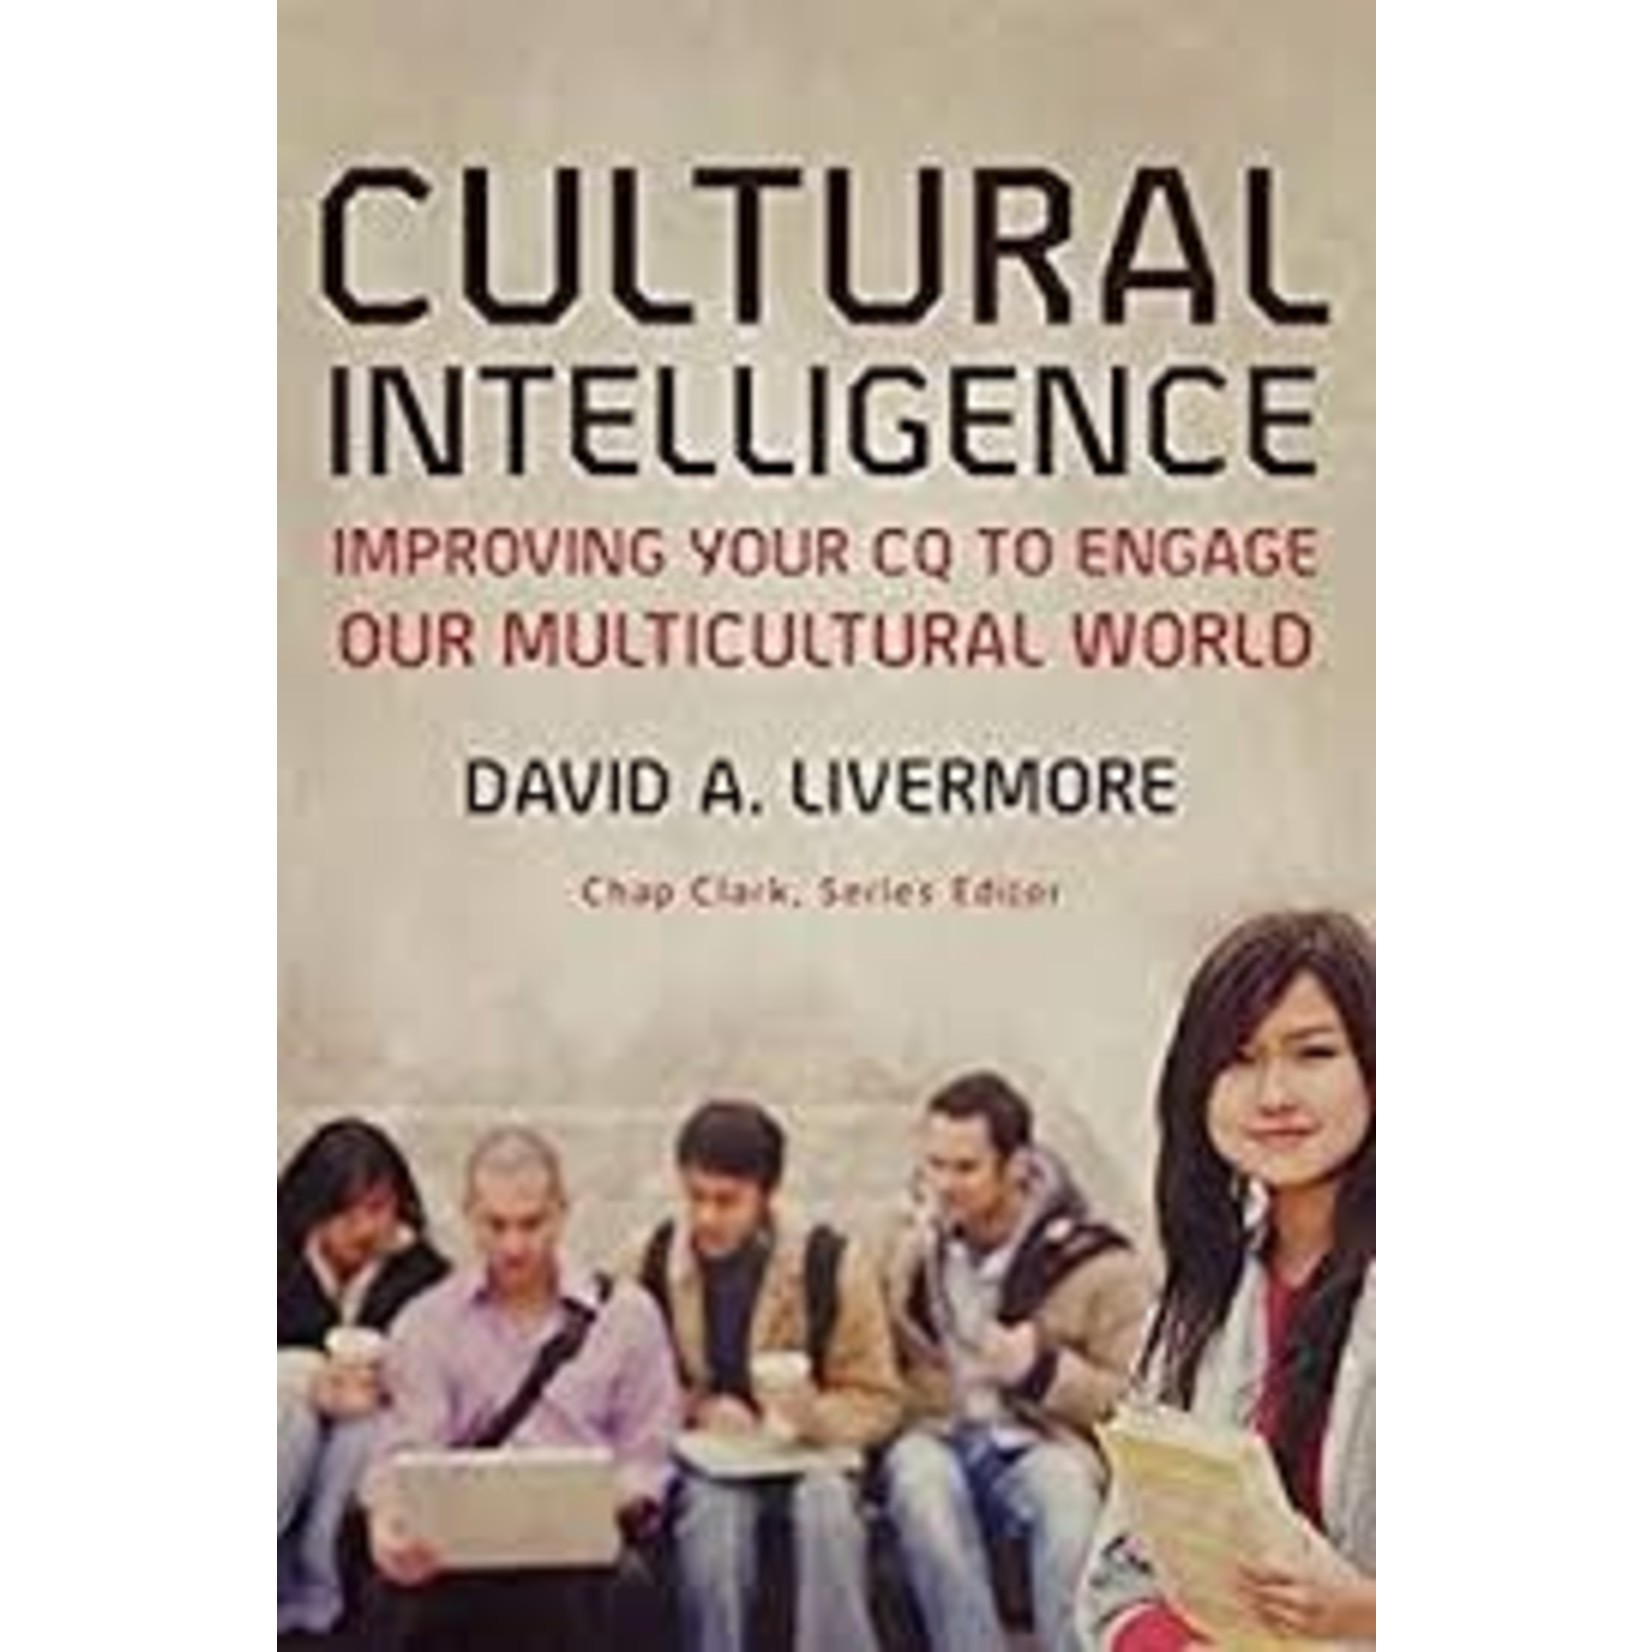 Cultural Intelligence: Improving Your CQ